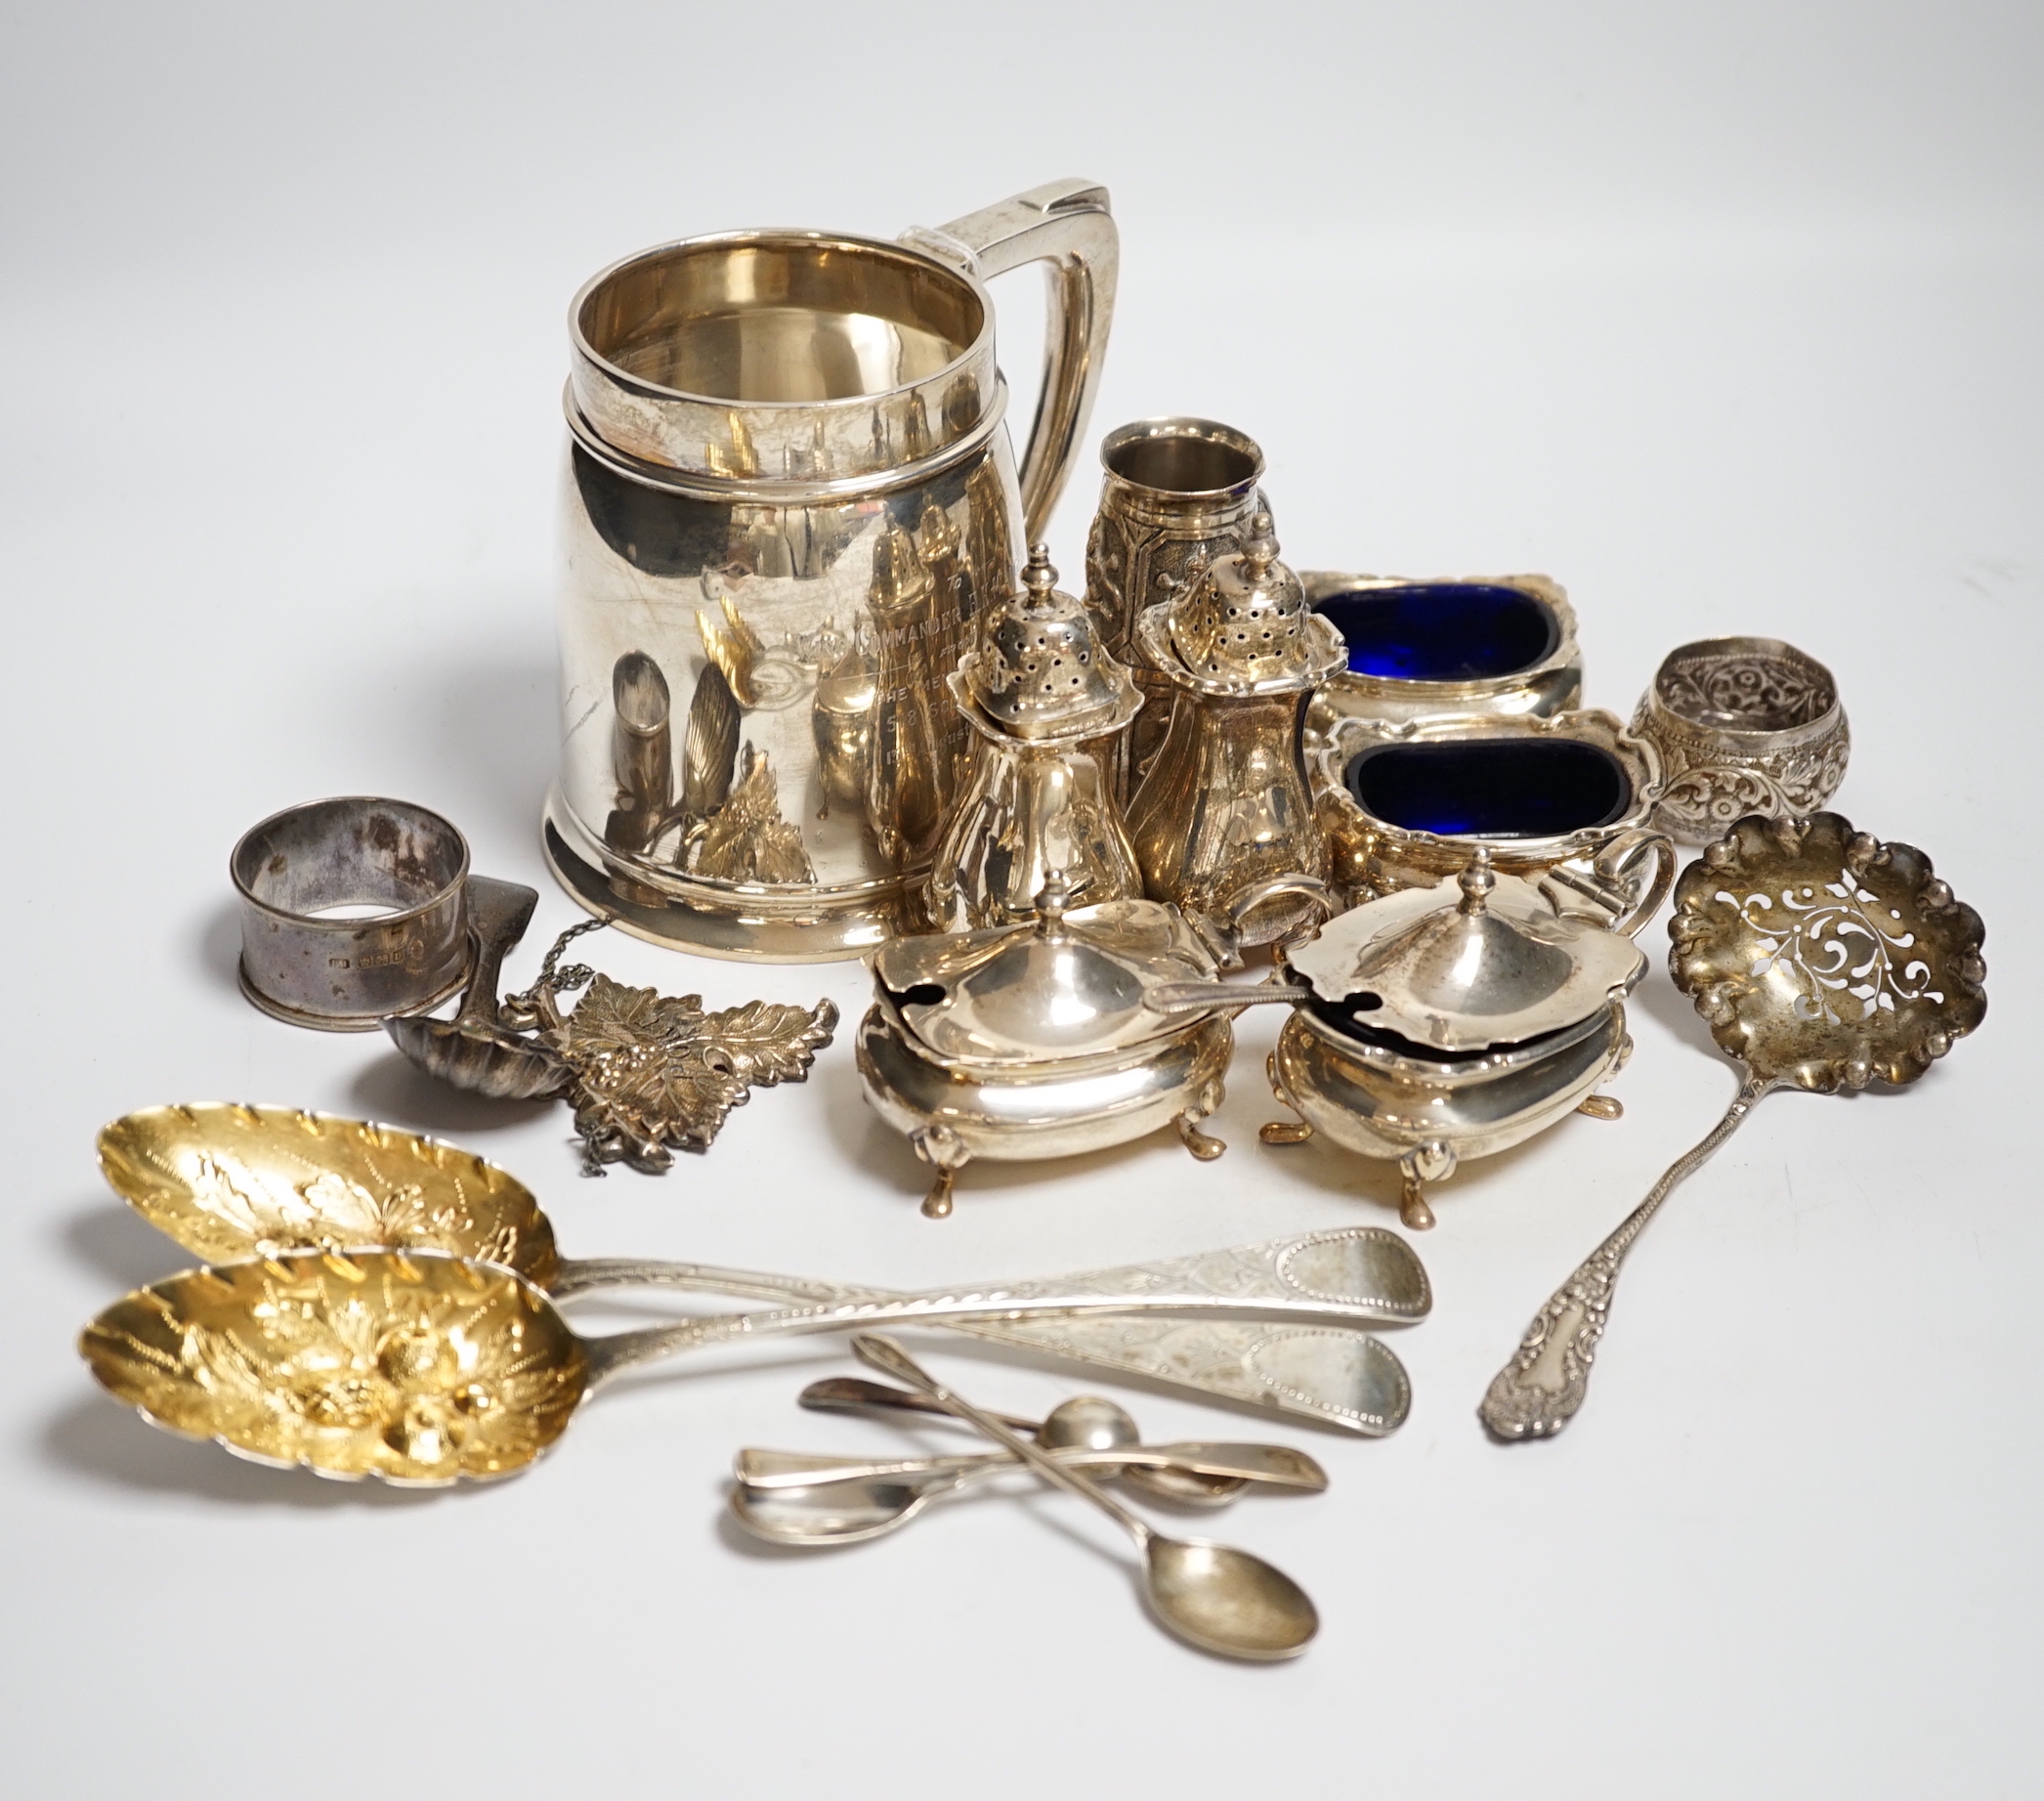 A George VI silver mug, Birmingham, 1937, 11.5cm with engraved inscription to Wing Commander E.E.M Angell, a pair of George III Old English pattern berry spoons, a George IV silver caddy spoons and other items including